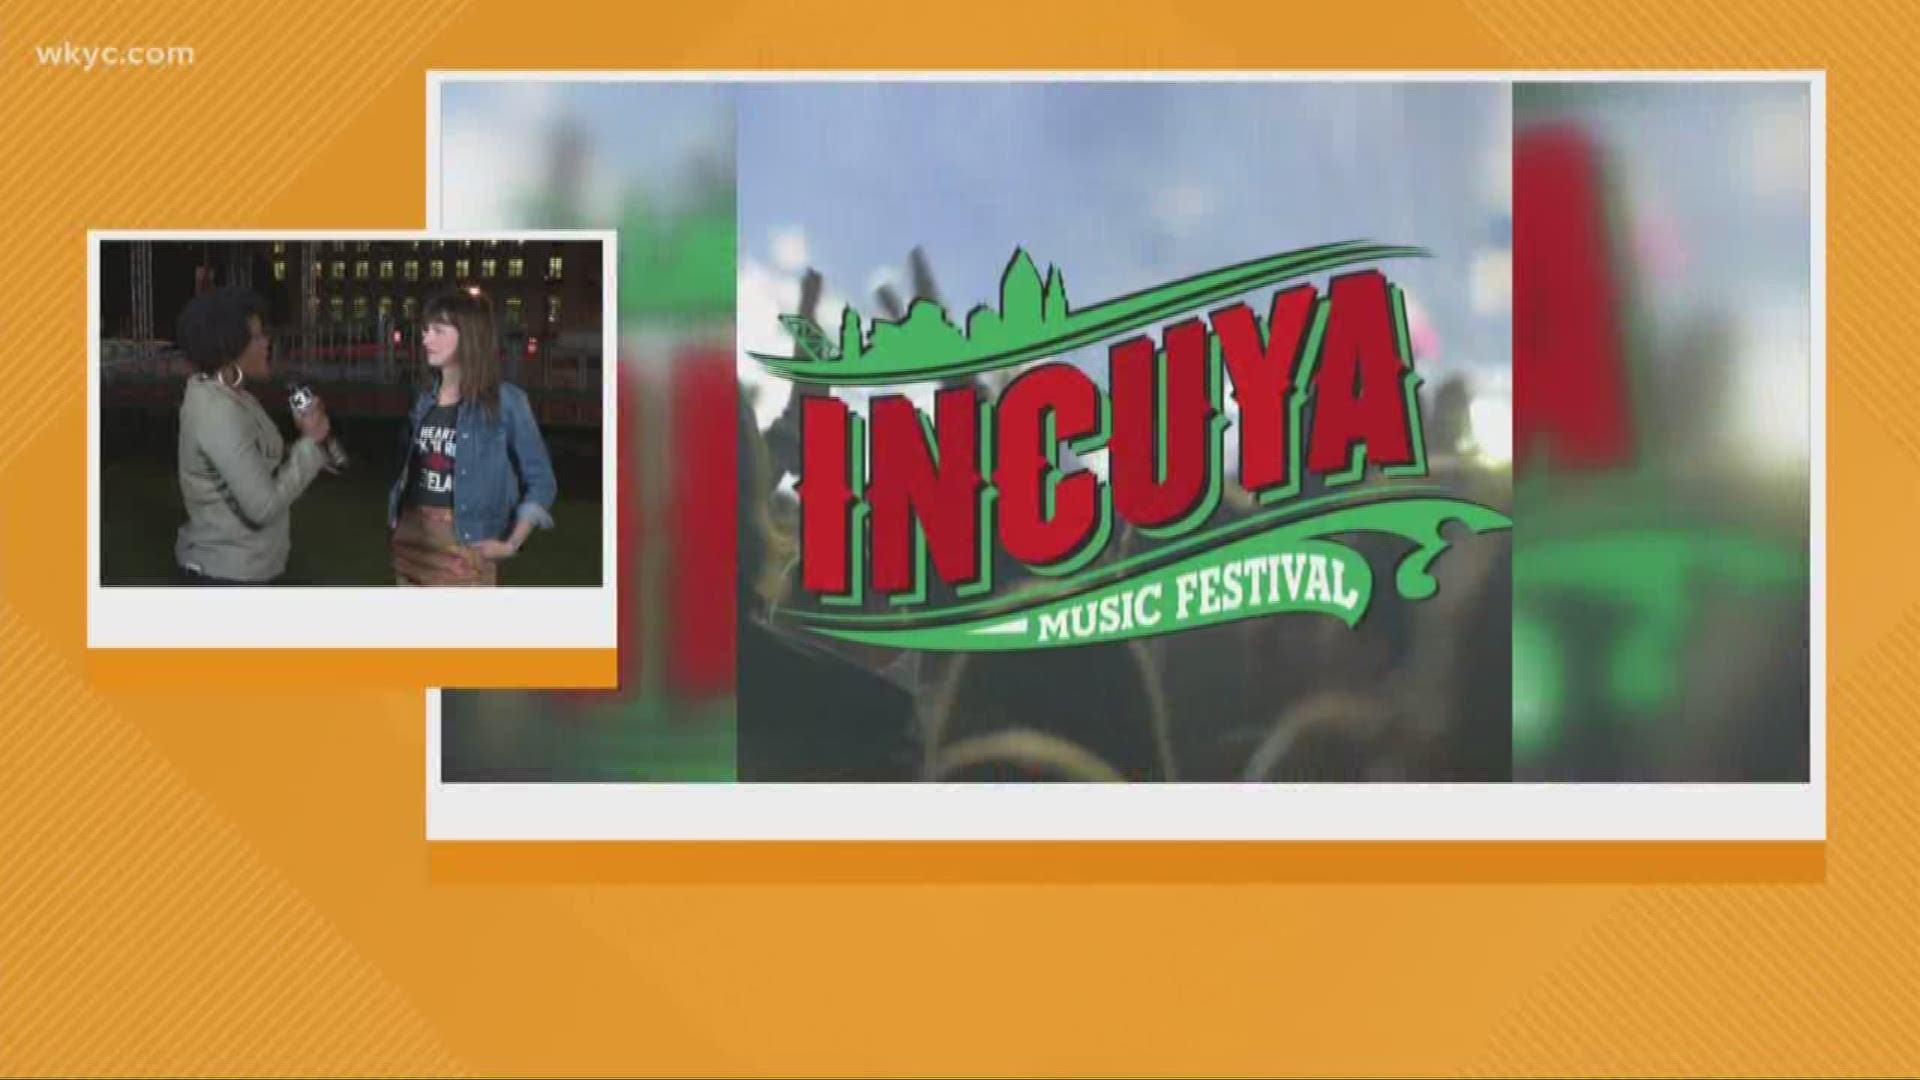 Aug. 23, 2018: Are you ready for InCuya? Here's what you need to know about the downtown Cleveland music festival.